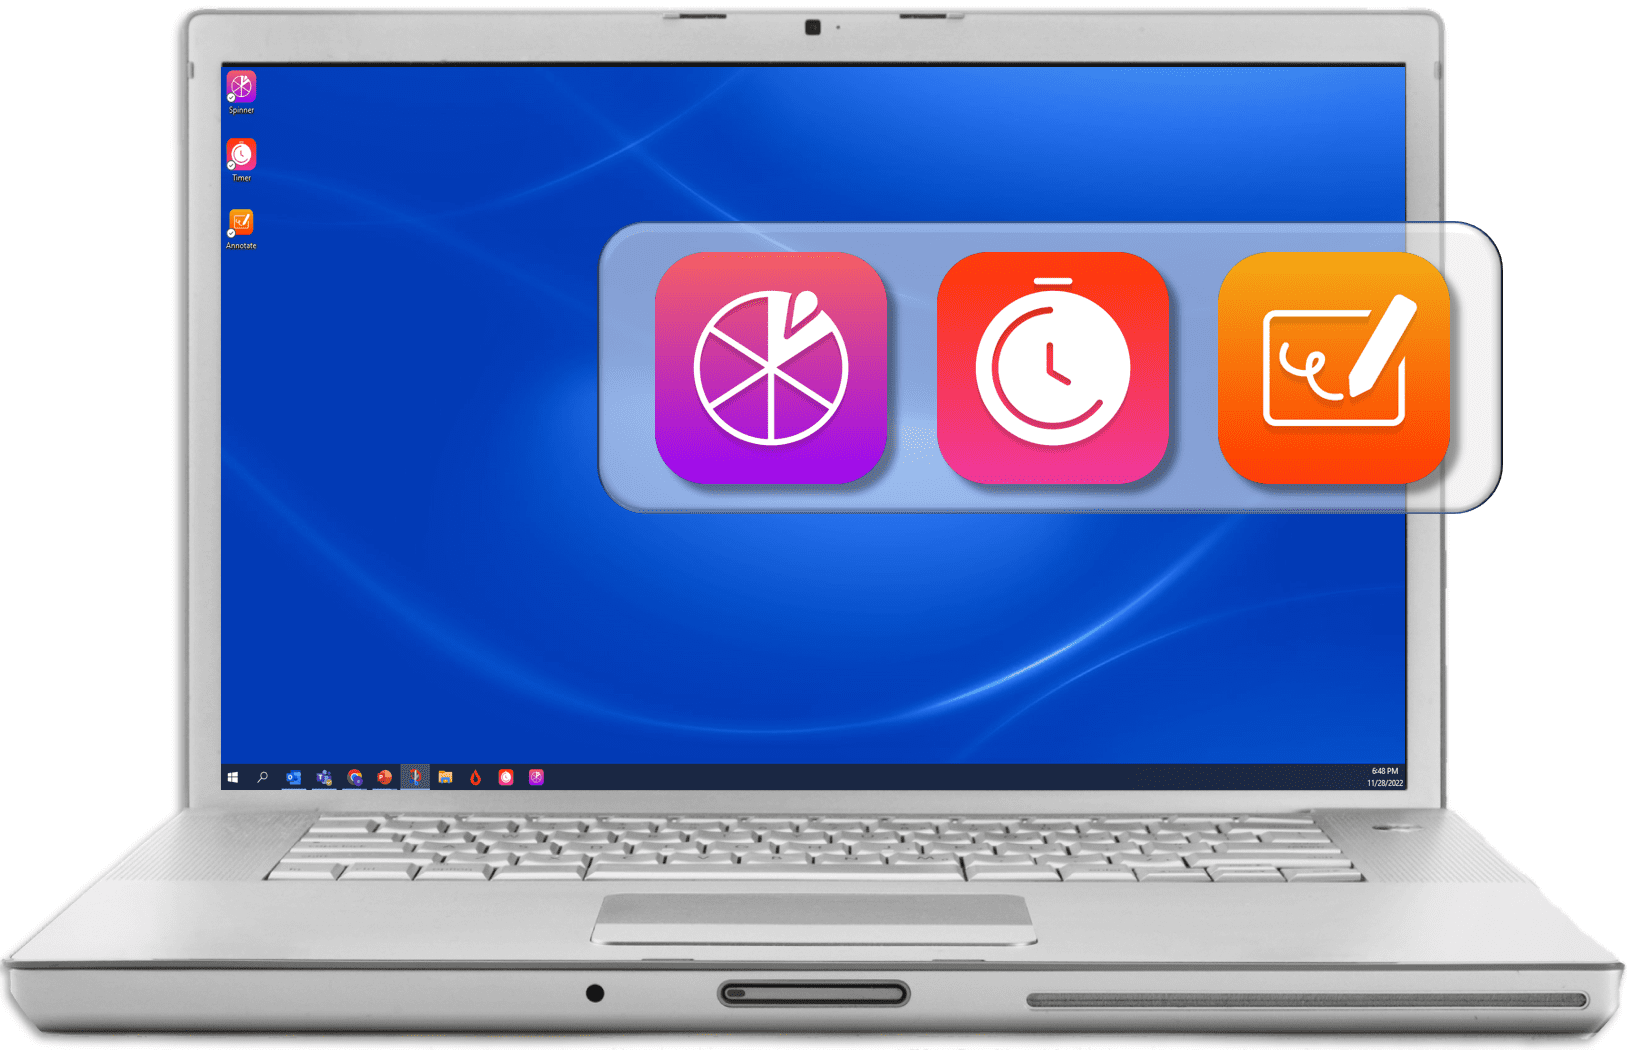 Promethean web applications: Spinner, Timer, and Annotate on a laptop